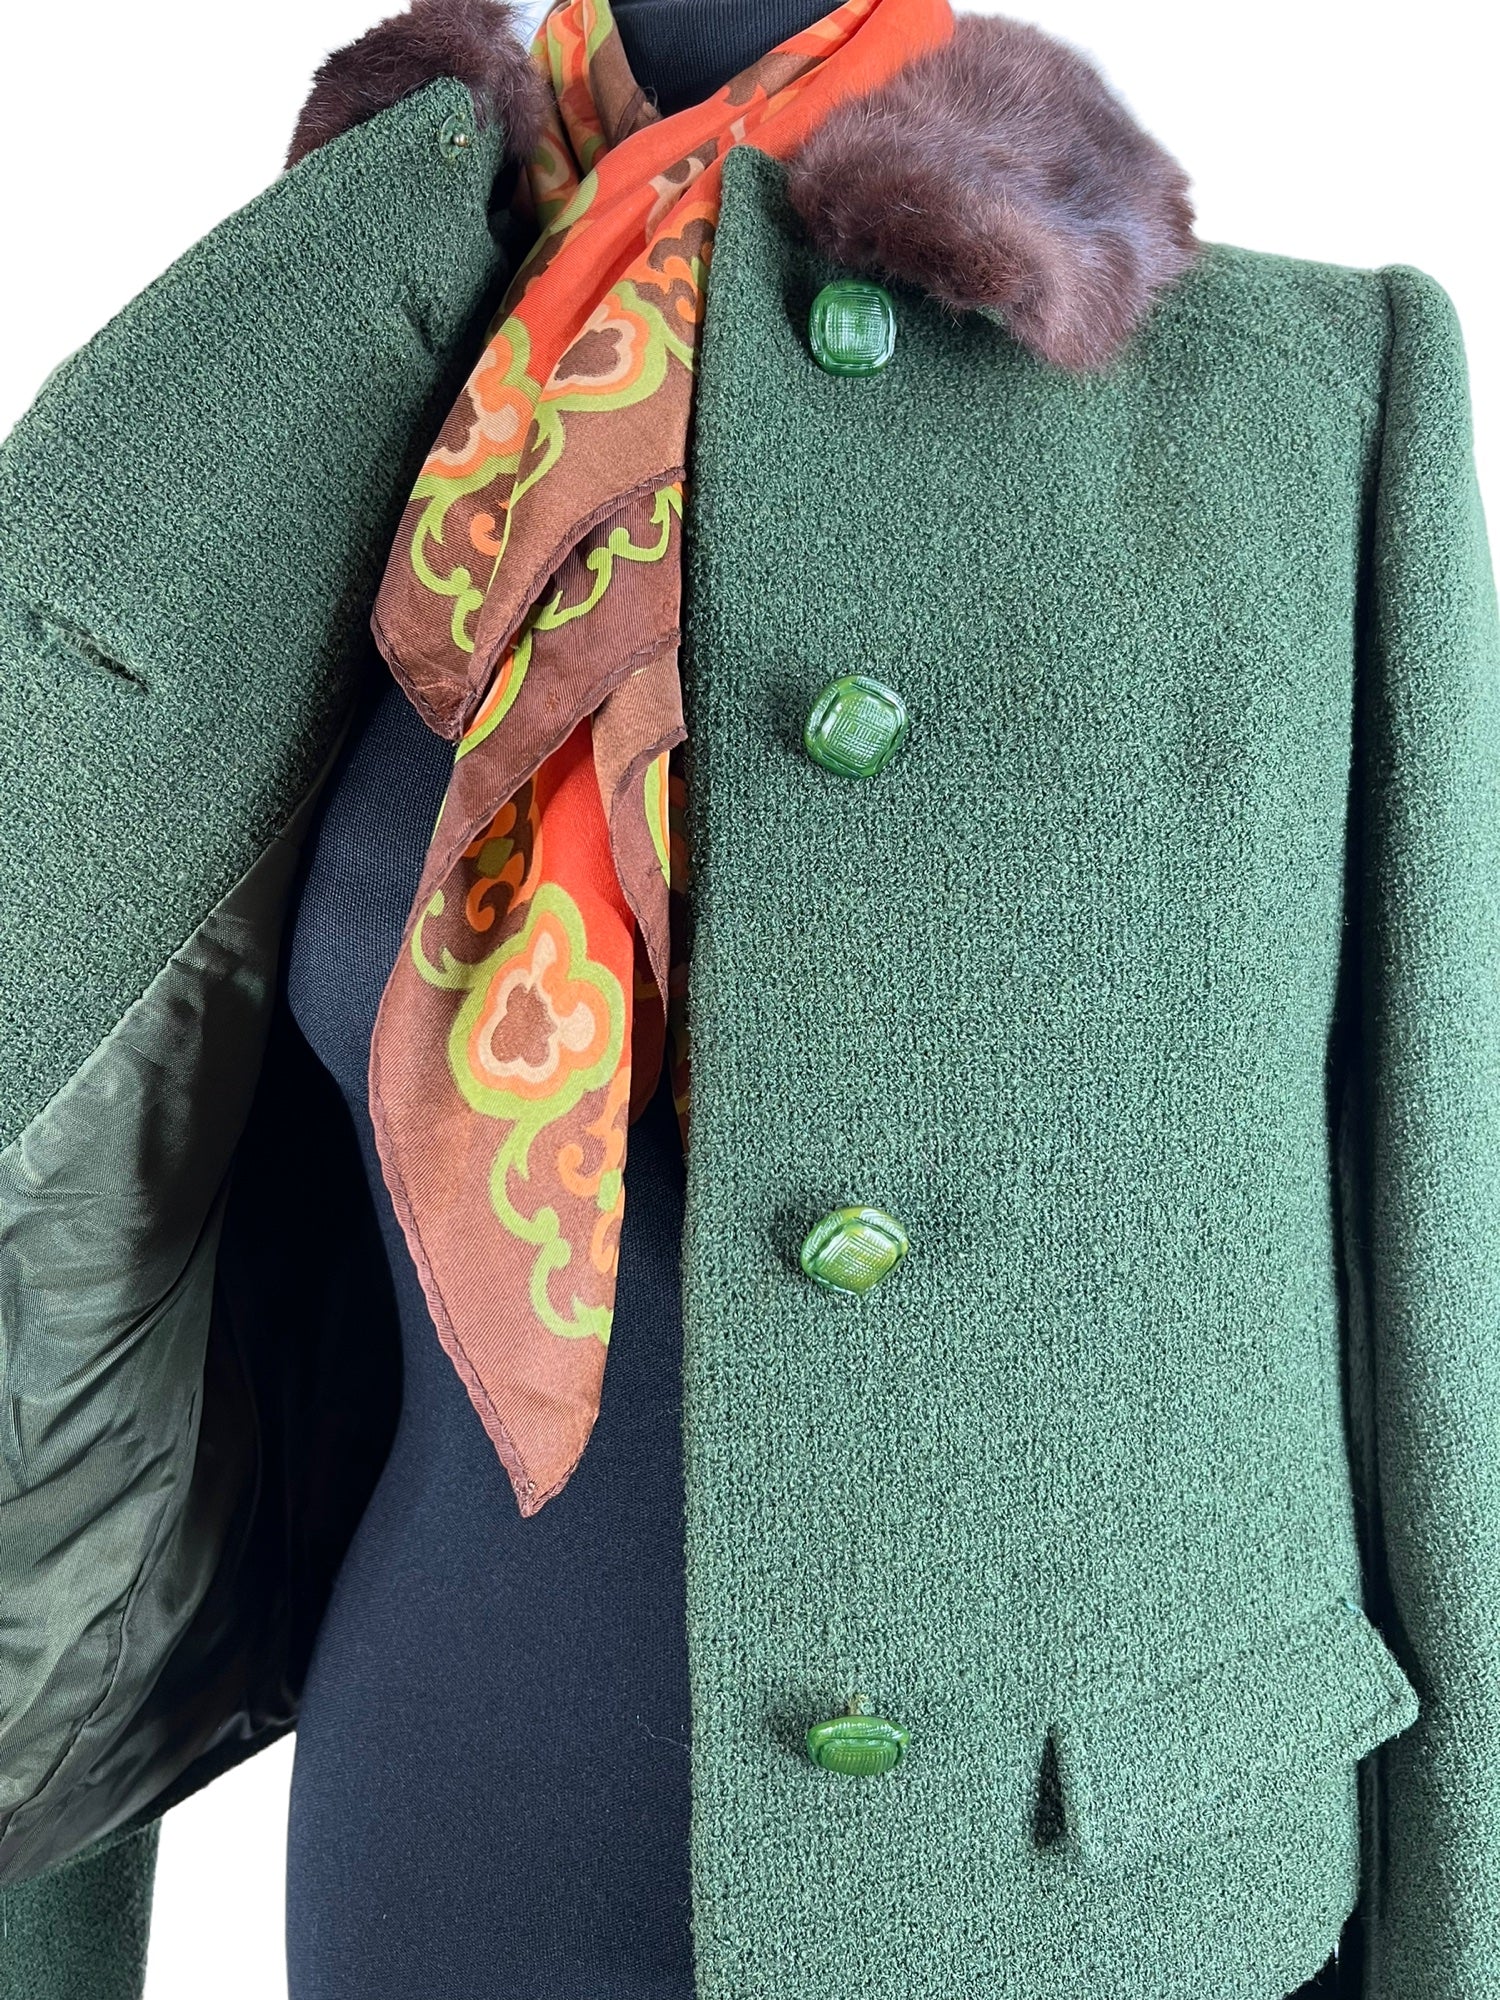 zero waste womens Winter Coat winter vintage Urban Village Vintage urban village UK thrifted thrift sustainable style store slow fashion short length short shop second hand save the planet reuse recycled recycle recycable preloved online ocassion modette MOD ladies Jacket Green festive fashion fabric button ethical Eco friendly Eco cropped cream coney fur collar Coney Fur coney concious fashion collar coat clothing clothes christmassy 60s 1960s 12